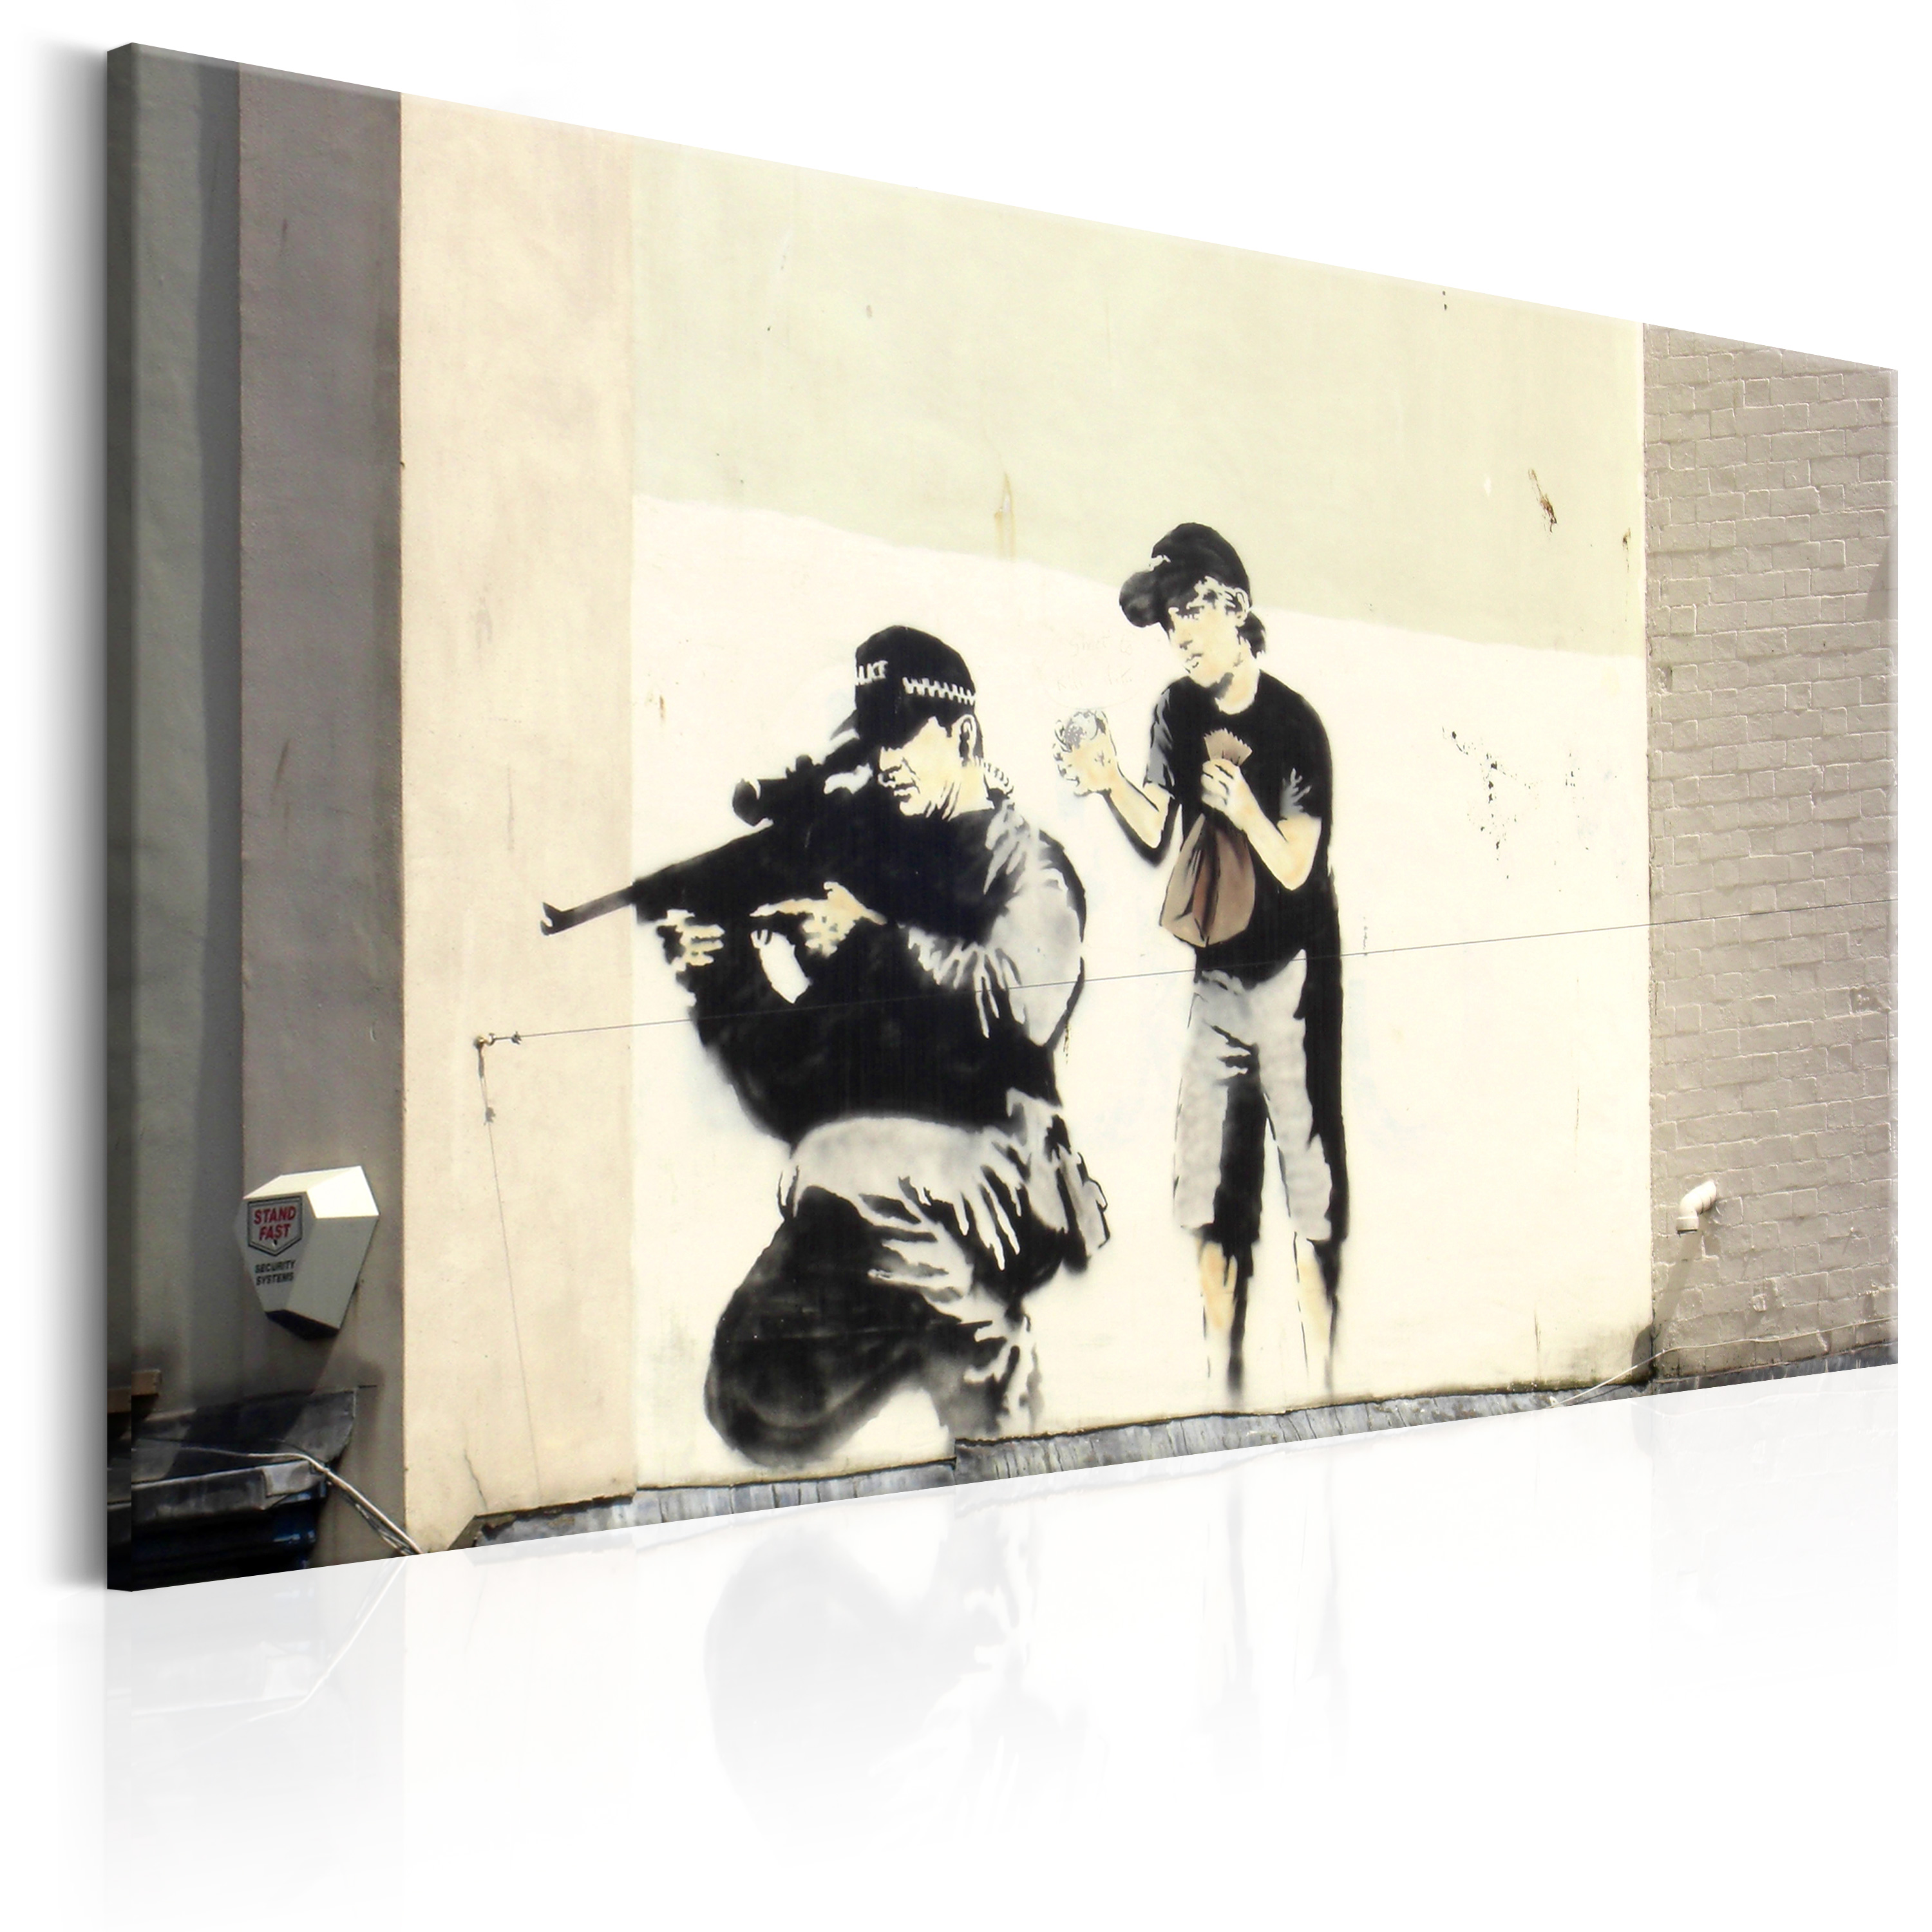 Canvas Print - Sniper and Child by Banksy - 60x40